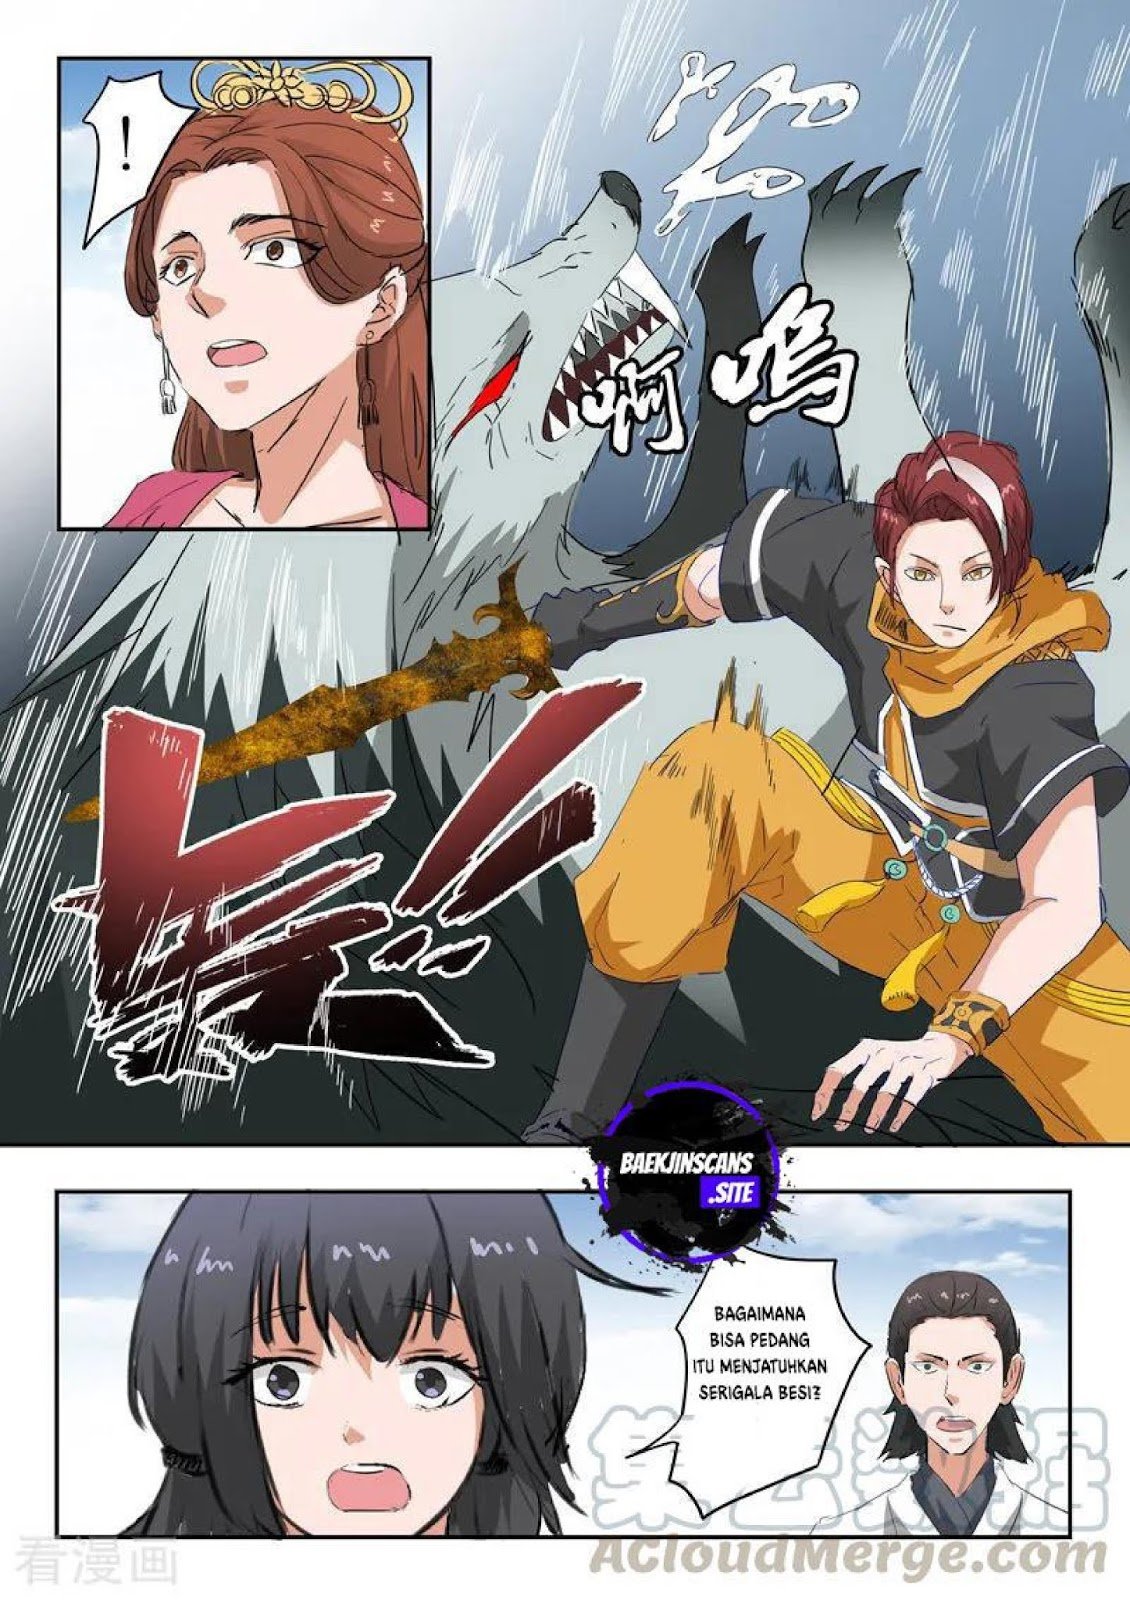 Martial Master Chapter 323